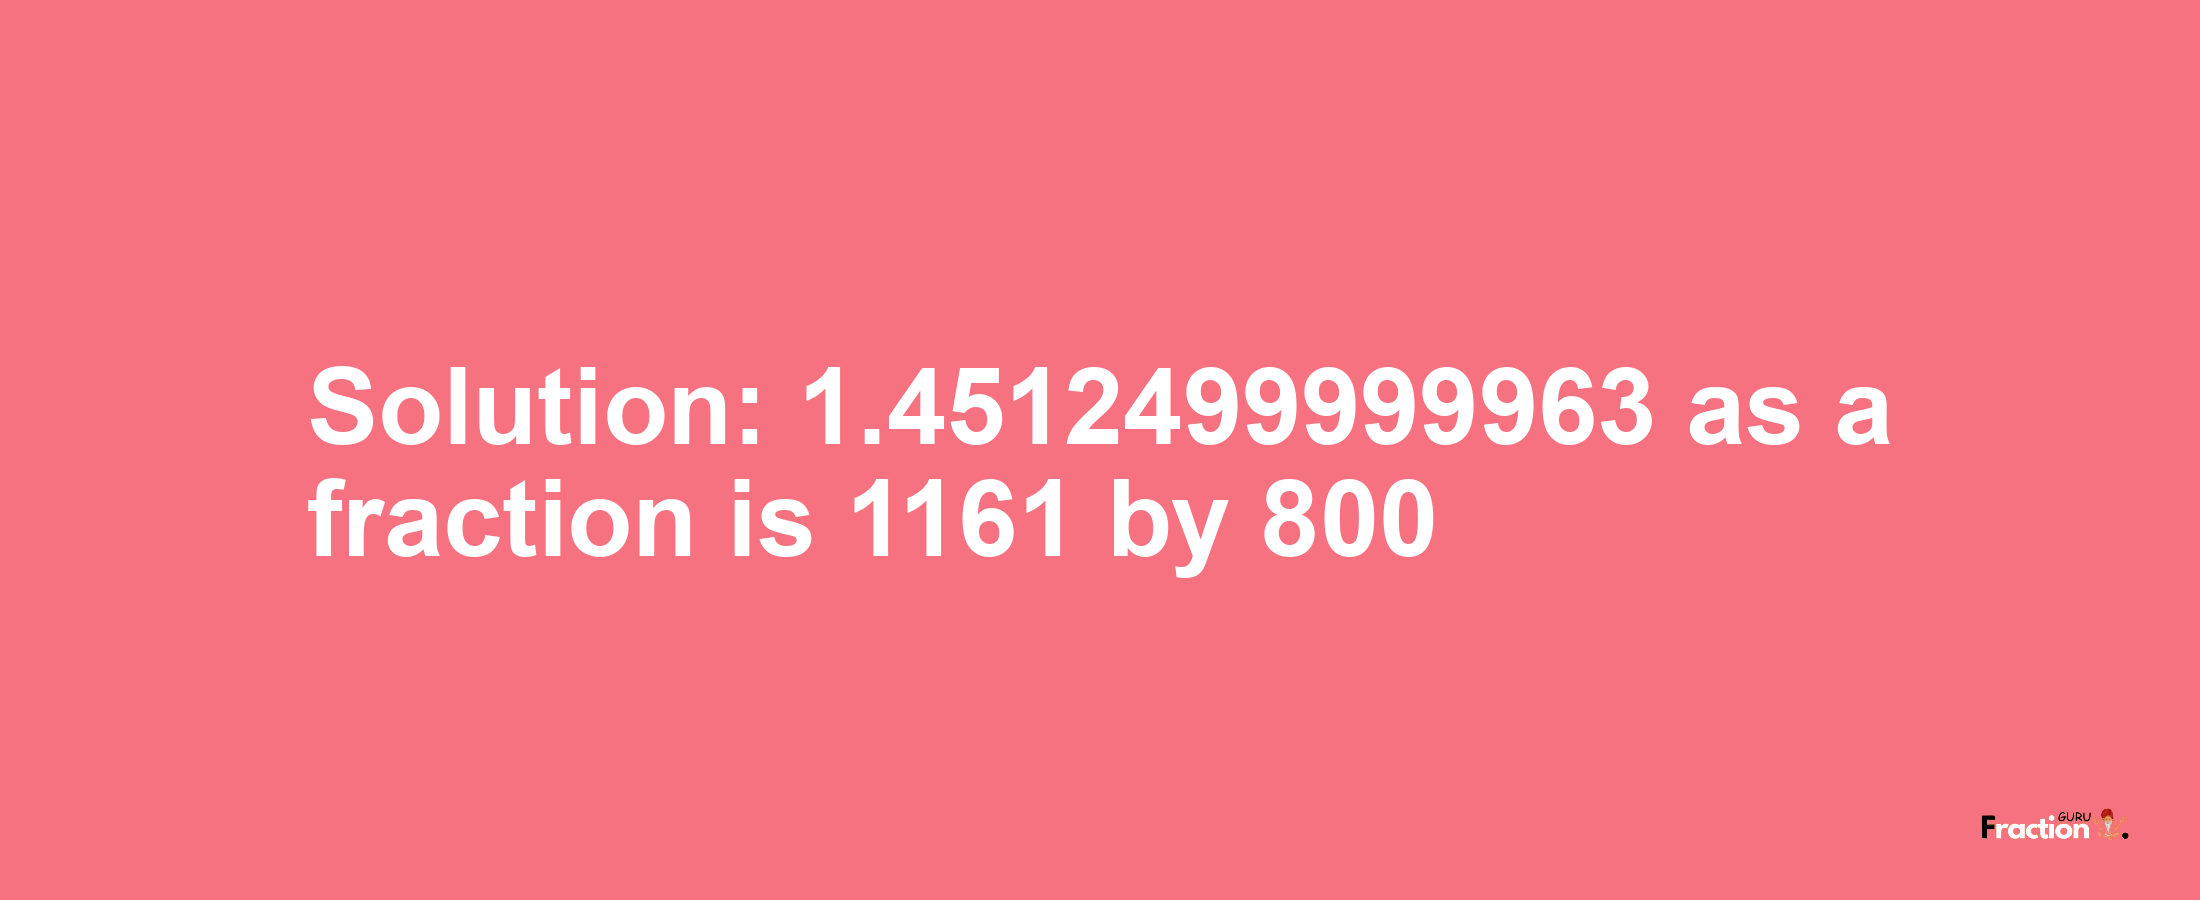 Solution:1.4512499999963 as a fraction is 1161/800